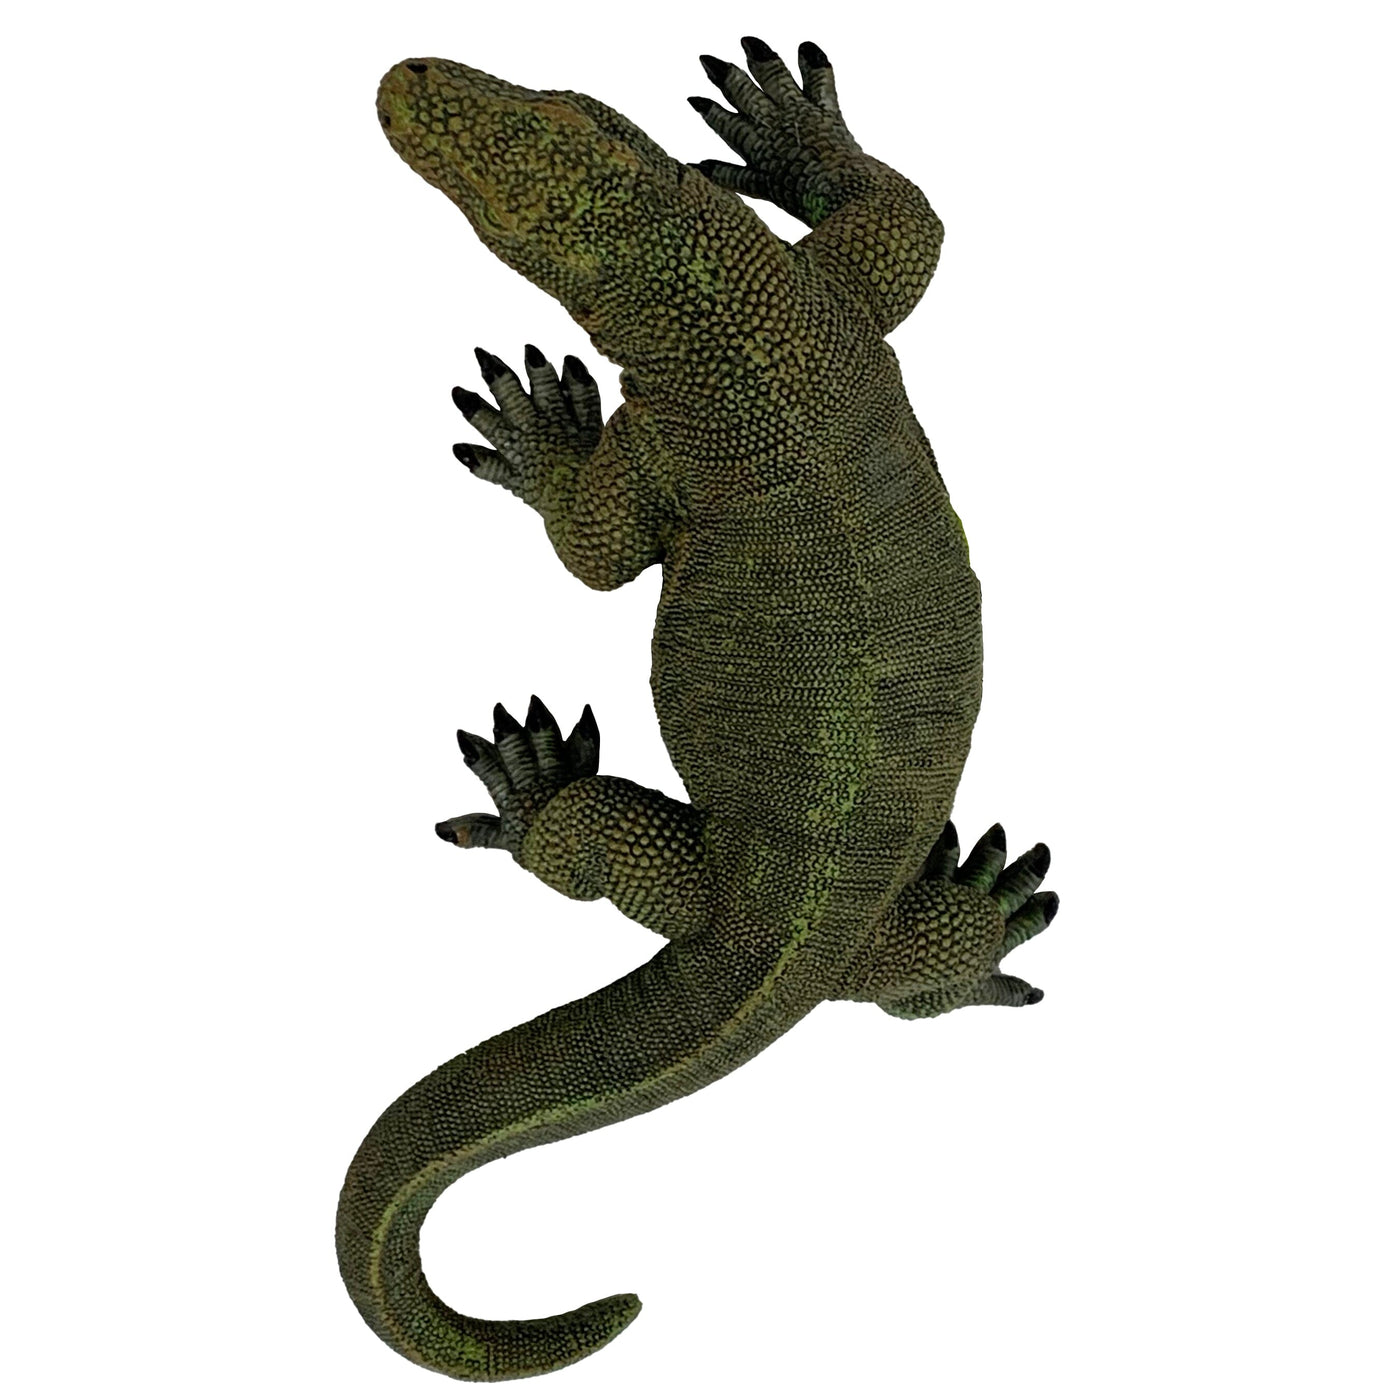 Turtle Max Reptile Gifts > Realistic Plastic Frogs (10)